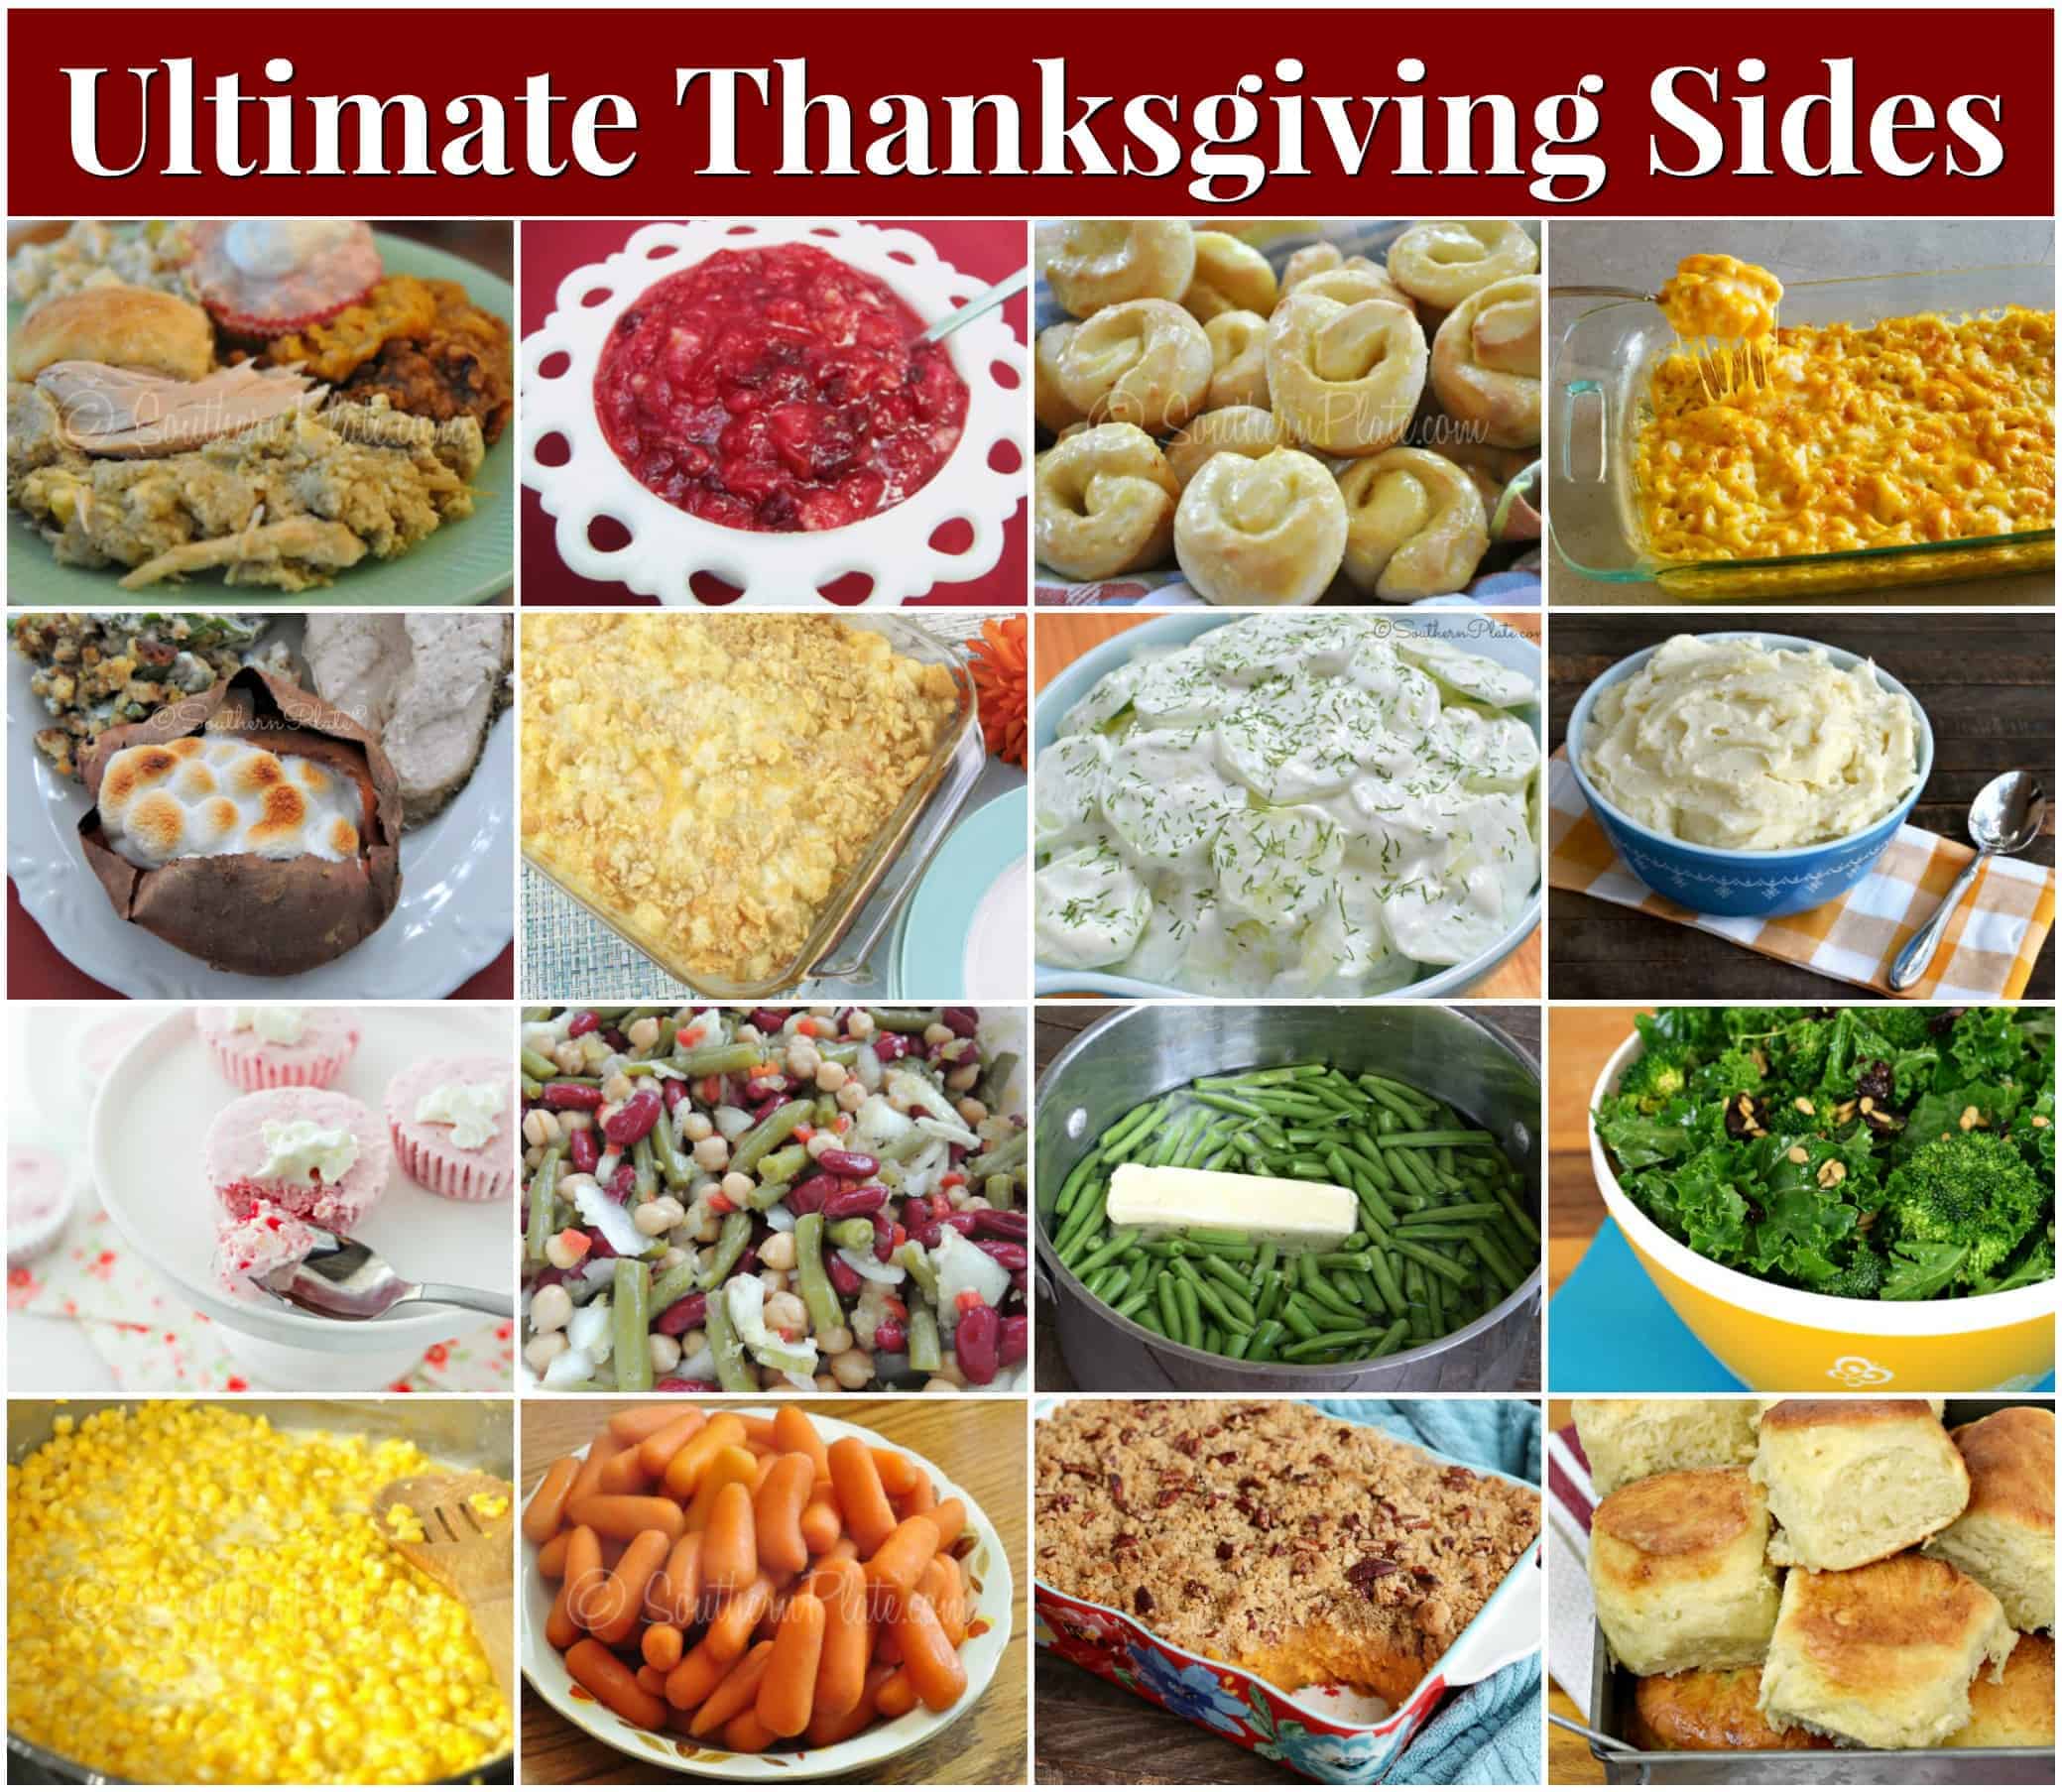 Ultimate Thanksgiving Side Dish Recipes